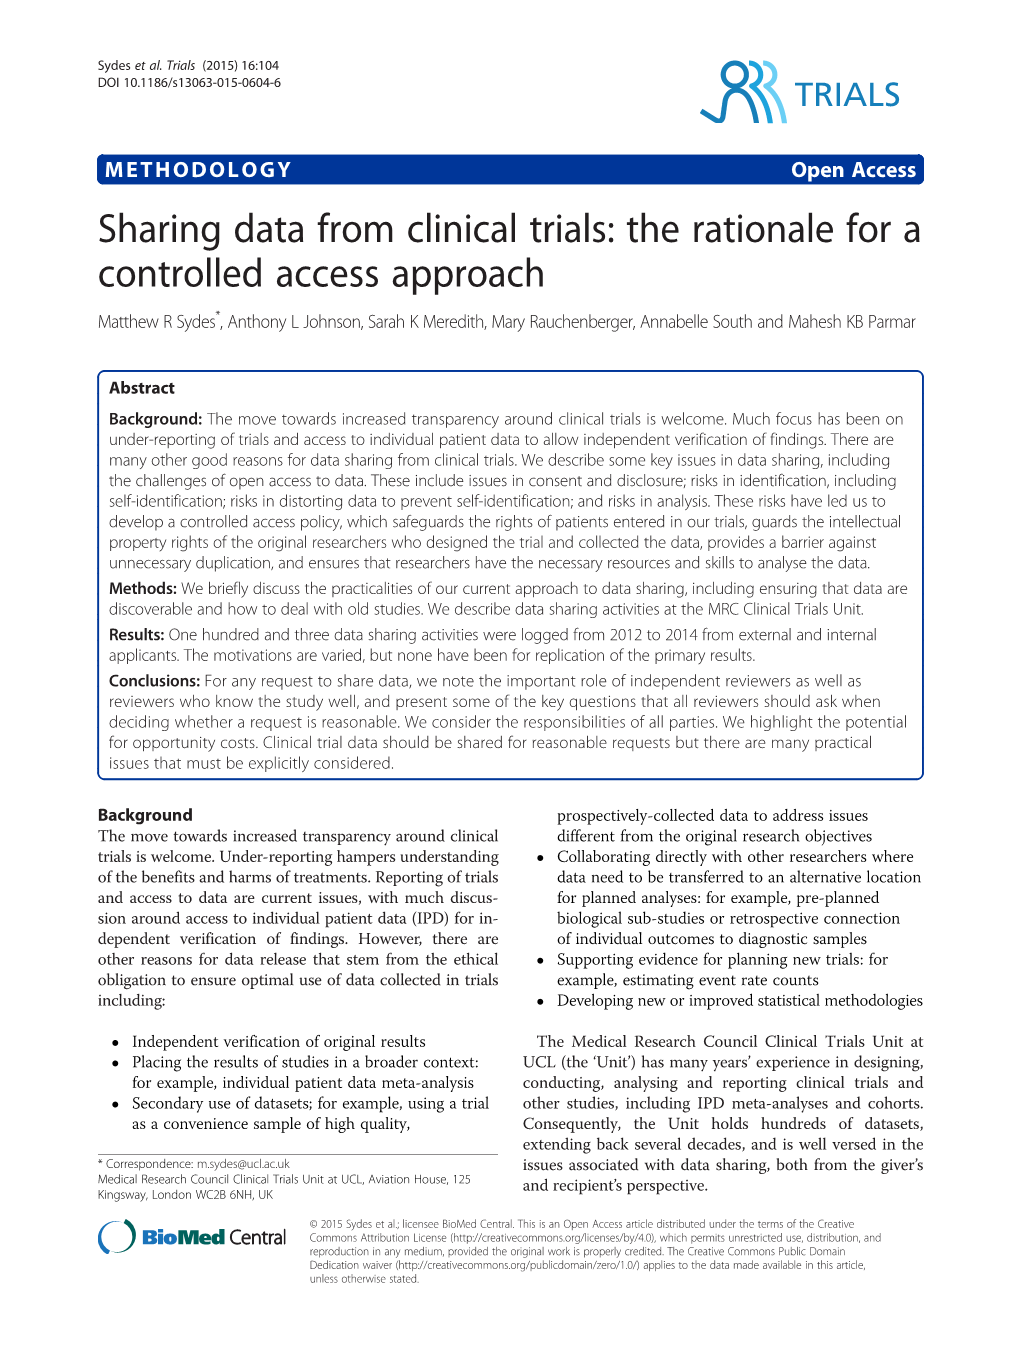 Sharing Data from Clinical Trials: the Rationale for a Controlled Access